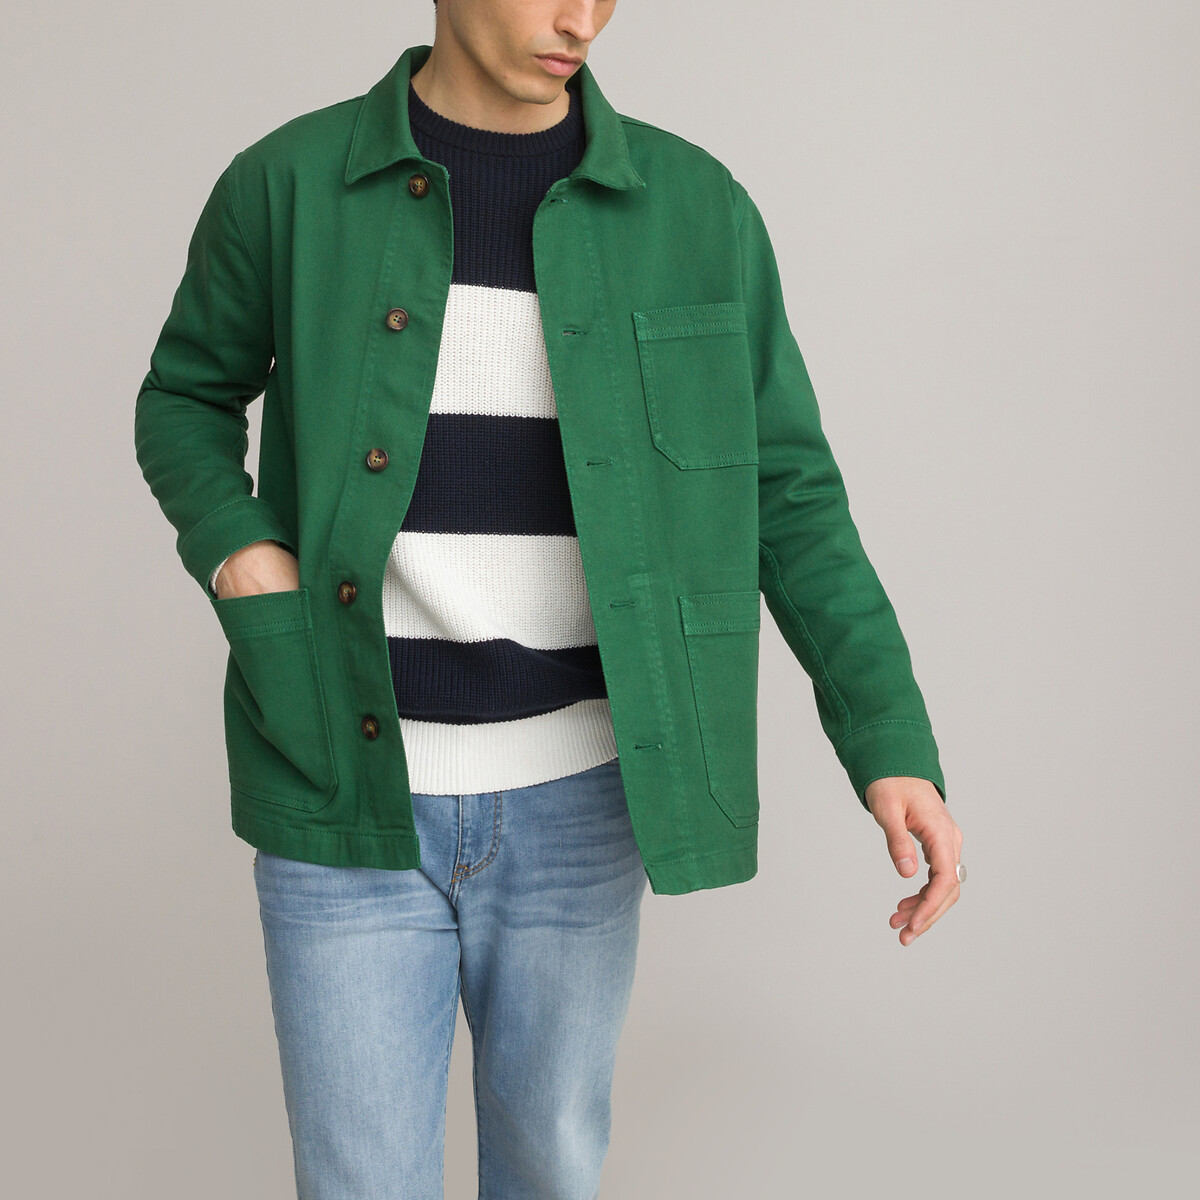 Cotton straight fit jacket racing green La Redoute Collections